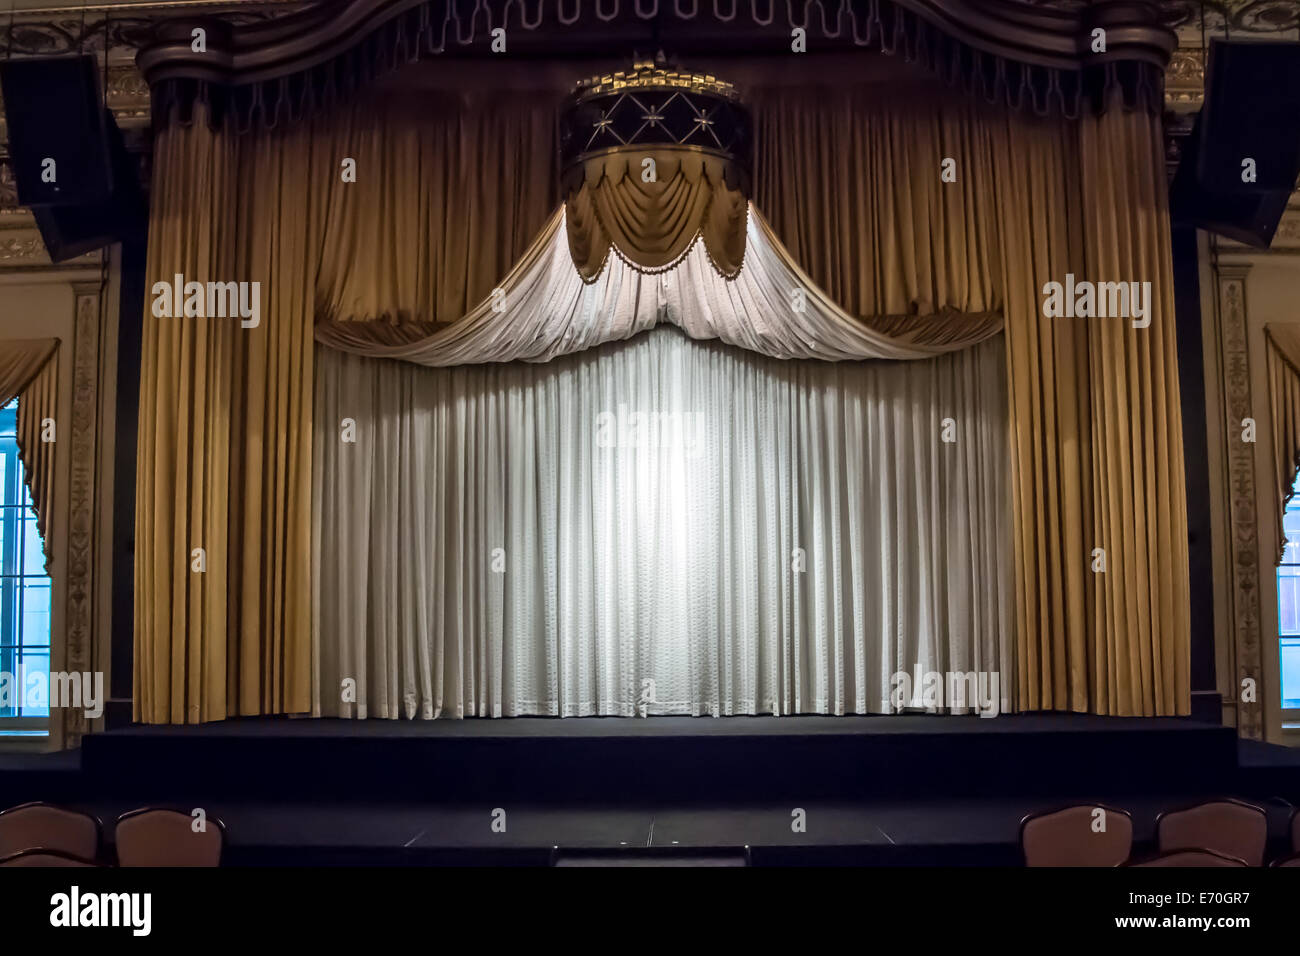 The curtain is drawn on a stage in a ballroom Stock Photo